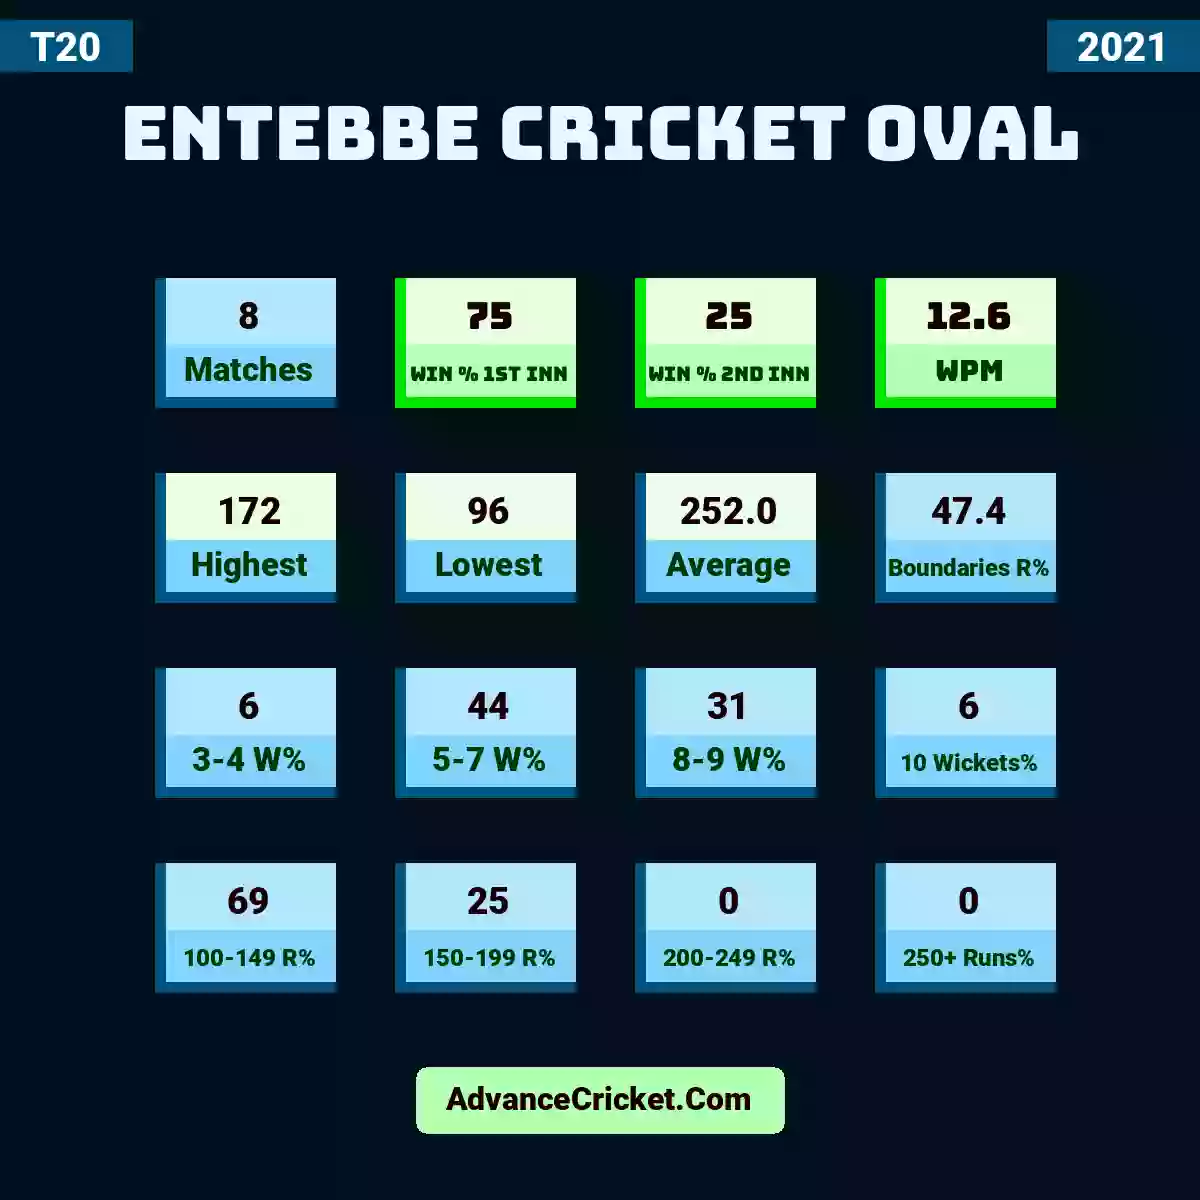 Image showing Entebbe Cricket Oval with Matches: 8, Win % 1st Inn: 75, Win % 2nd Inn: 25, WPM: 12.6, Highest: 172, Lowest: 96, Average: 252.0, Boundaries R%: 47.4, 3-4 W%: 6, 5-7 W%: 44, 8-9 W%: 31, 10 Wickets%: 6, 100-149 R%: 69, 150-199 R%: 25, 200-249 R%: 0, 250+ Runs%: 0.